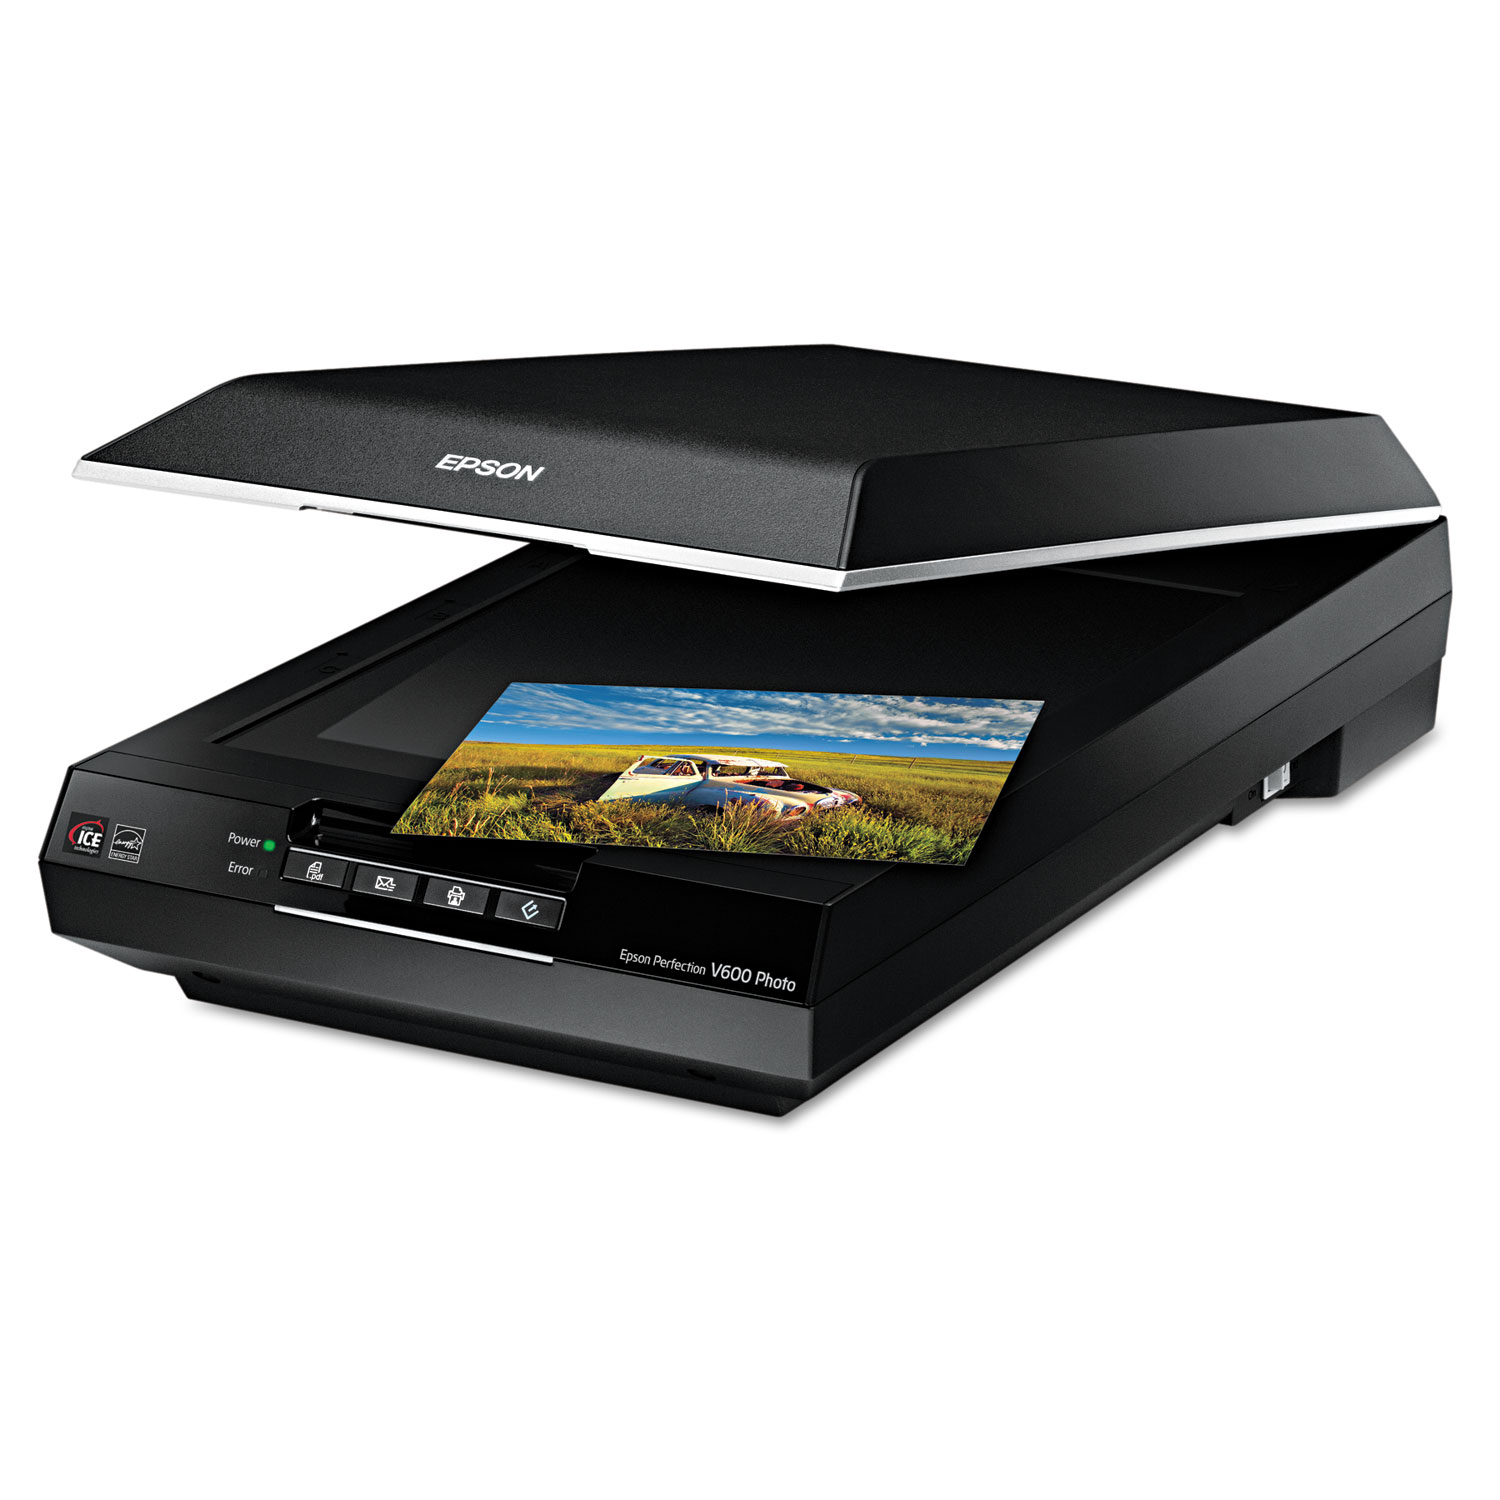  Epson B11B198011 Perfection V600 Photo Color Scanner, Scans Up to 8.5 x 11.7, 6400 dpi Optical Resolution (EPSB11B198011) 